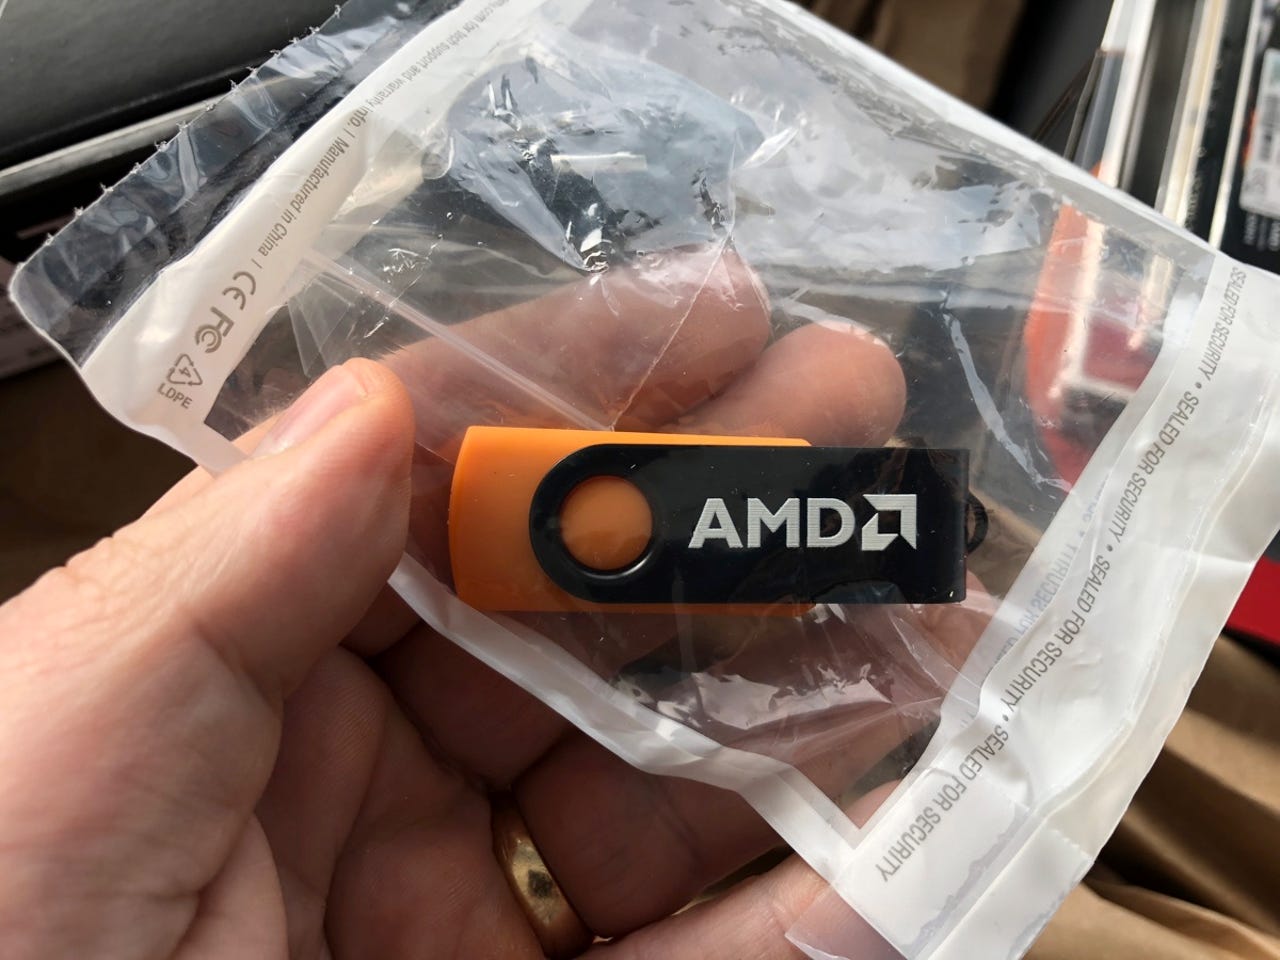 Mystery AMD USB key - No idea what's on this!